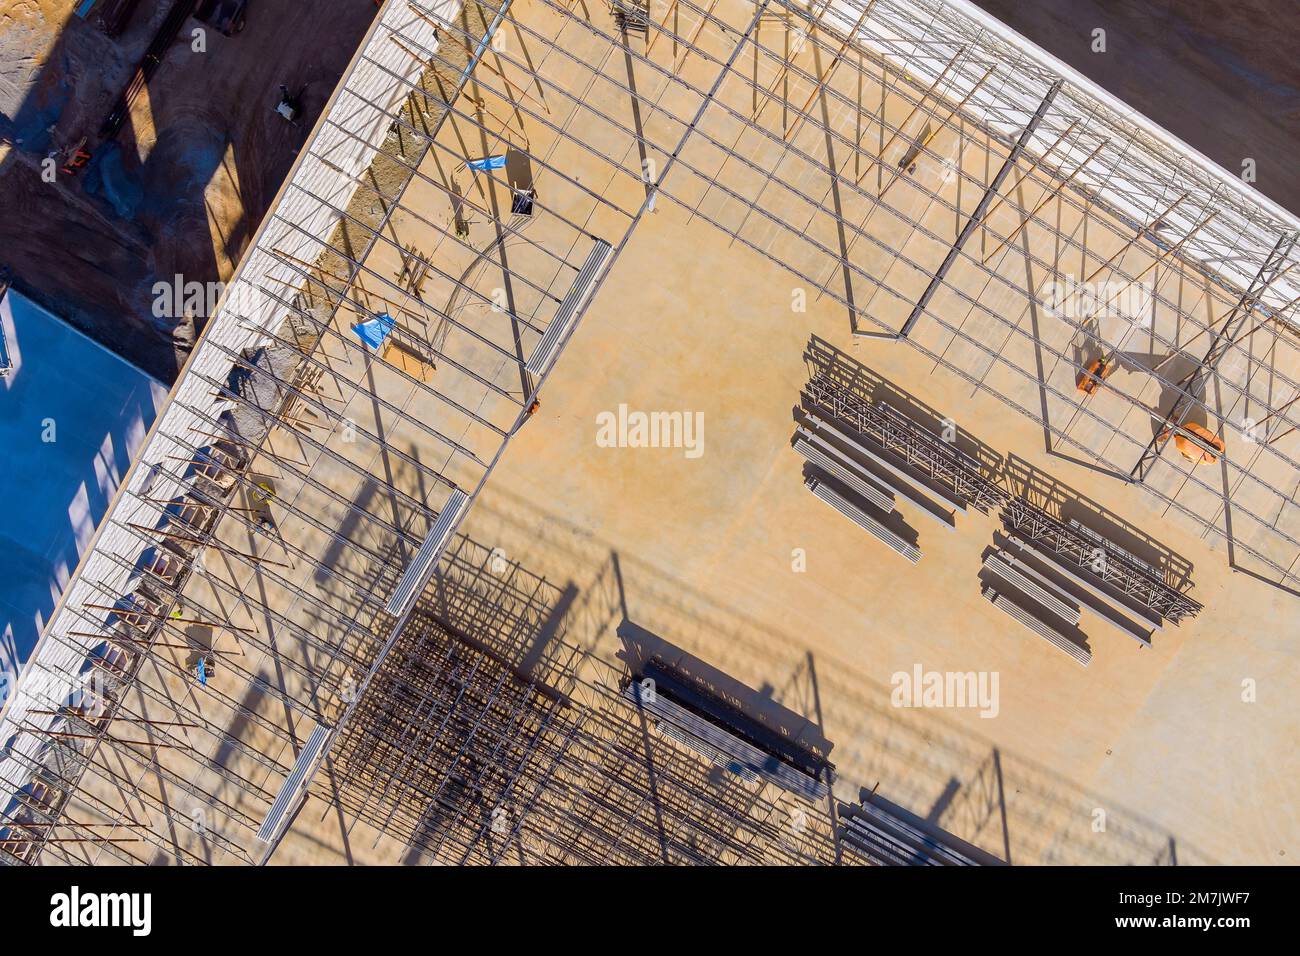 There building site where metal frame steel framework for warehouse roof truss is under construction Stock Photo